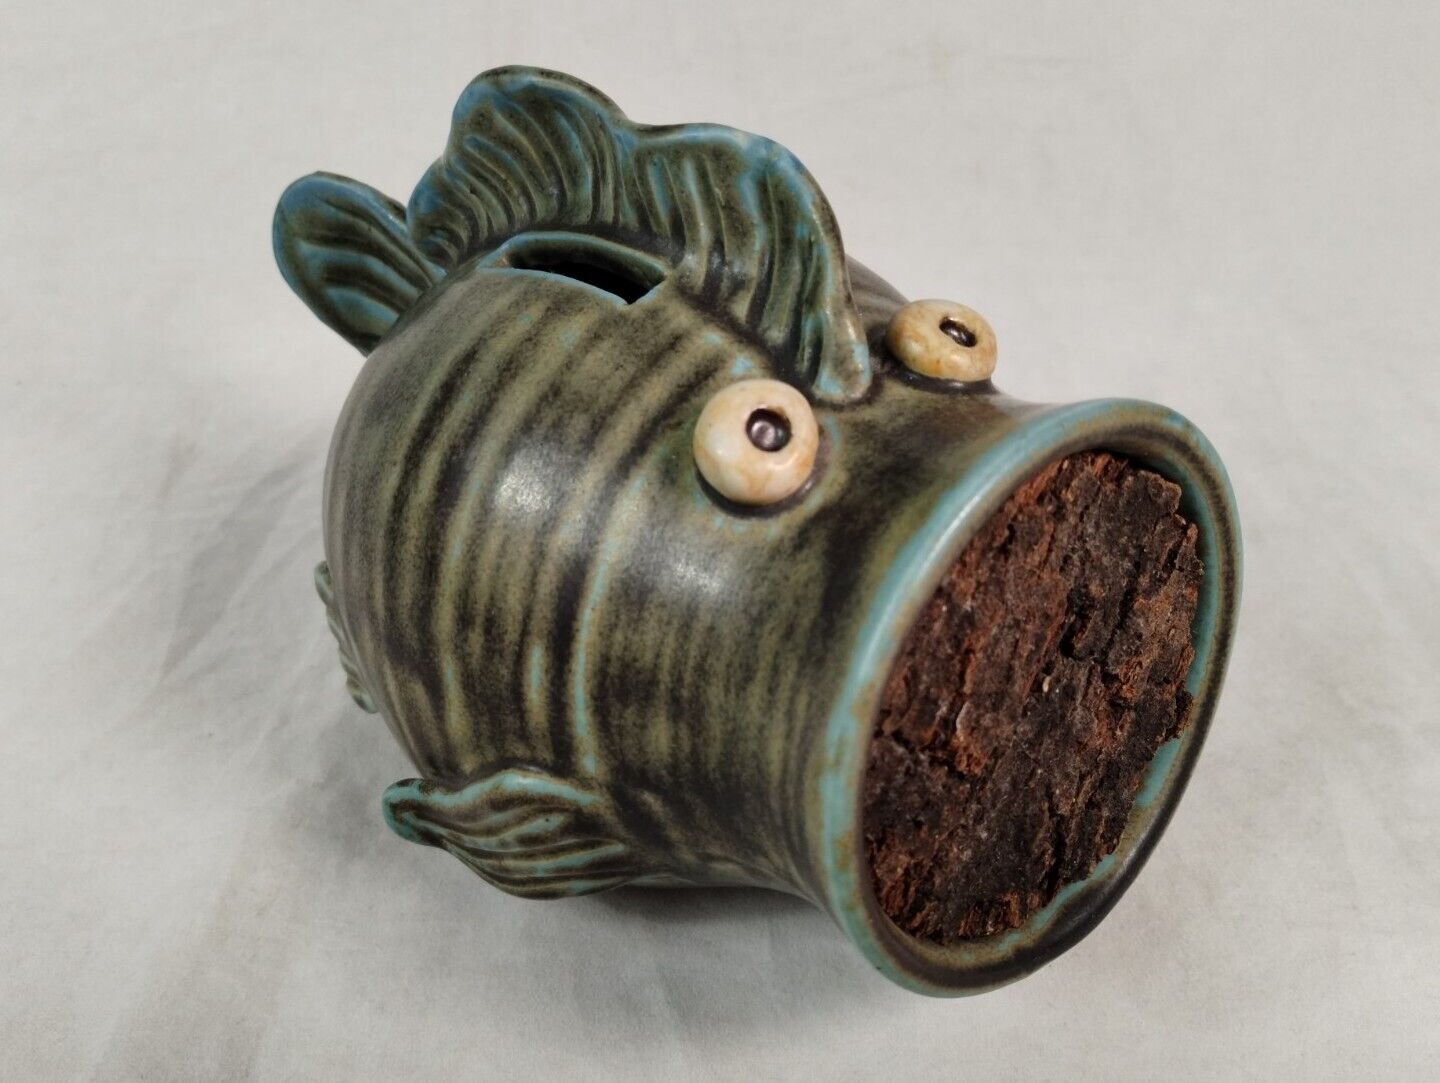 Vtg MCM Pottery Ceramic Hand Crafted Coin Piggy Bank BIG MOUTH FISH w/Cork Plug